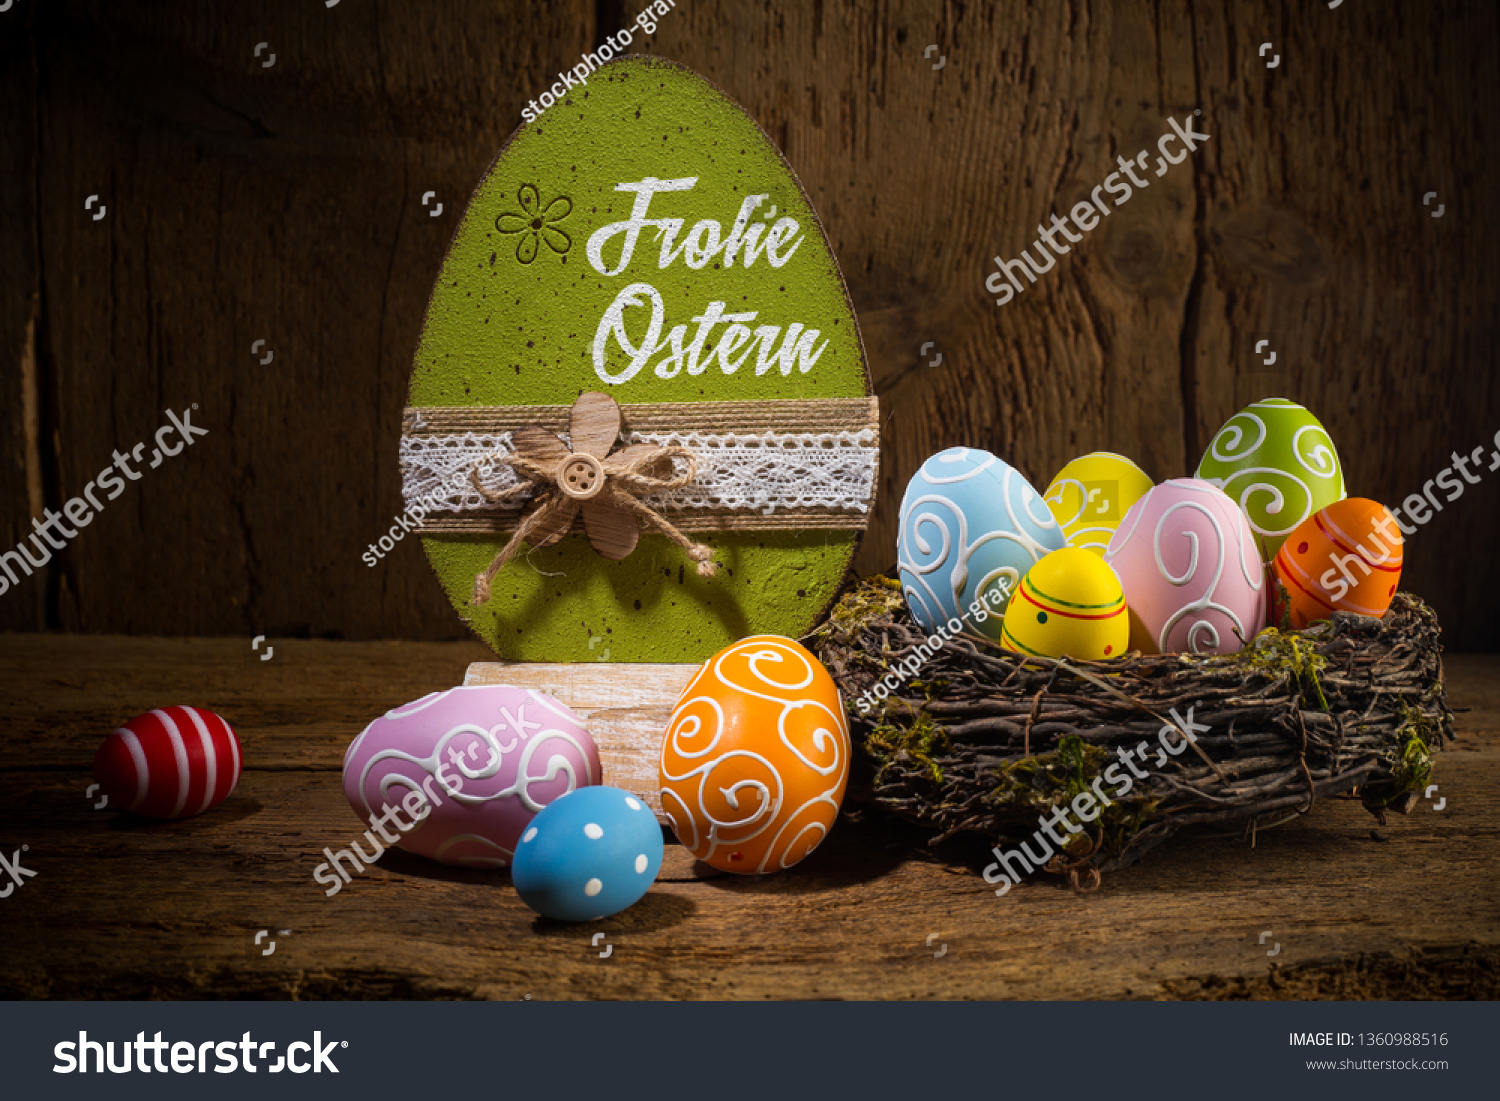 German greetings Frohe Ostern ( english translation happy easter ) Colorful painted eggs in birds nest basket on rustic wooden old  greeting card background #1360988516